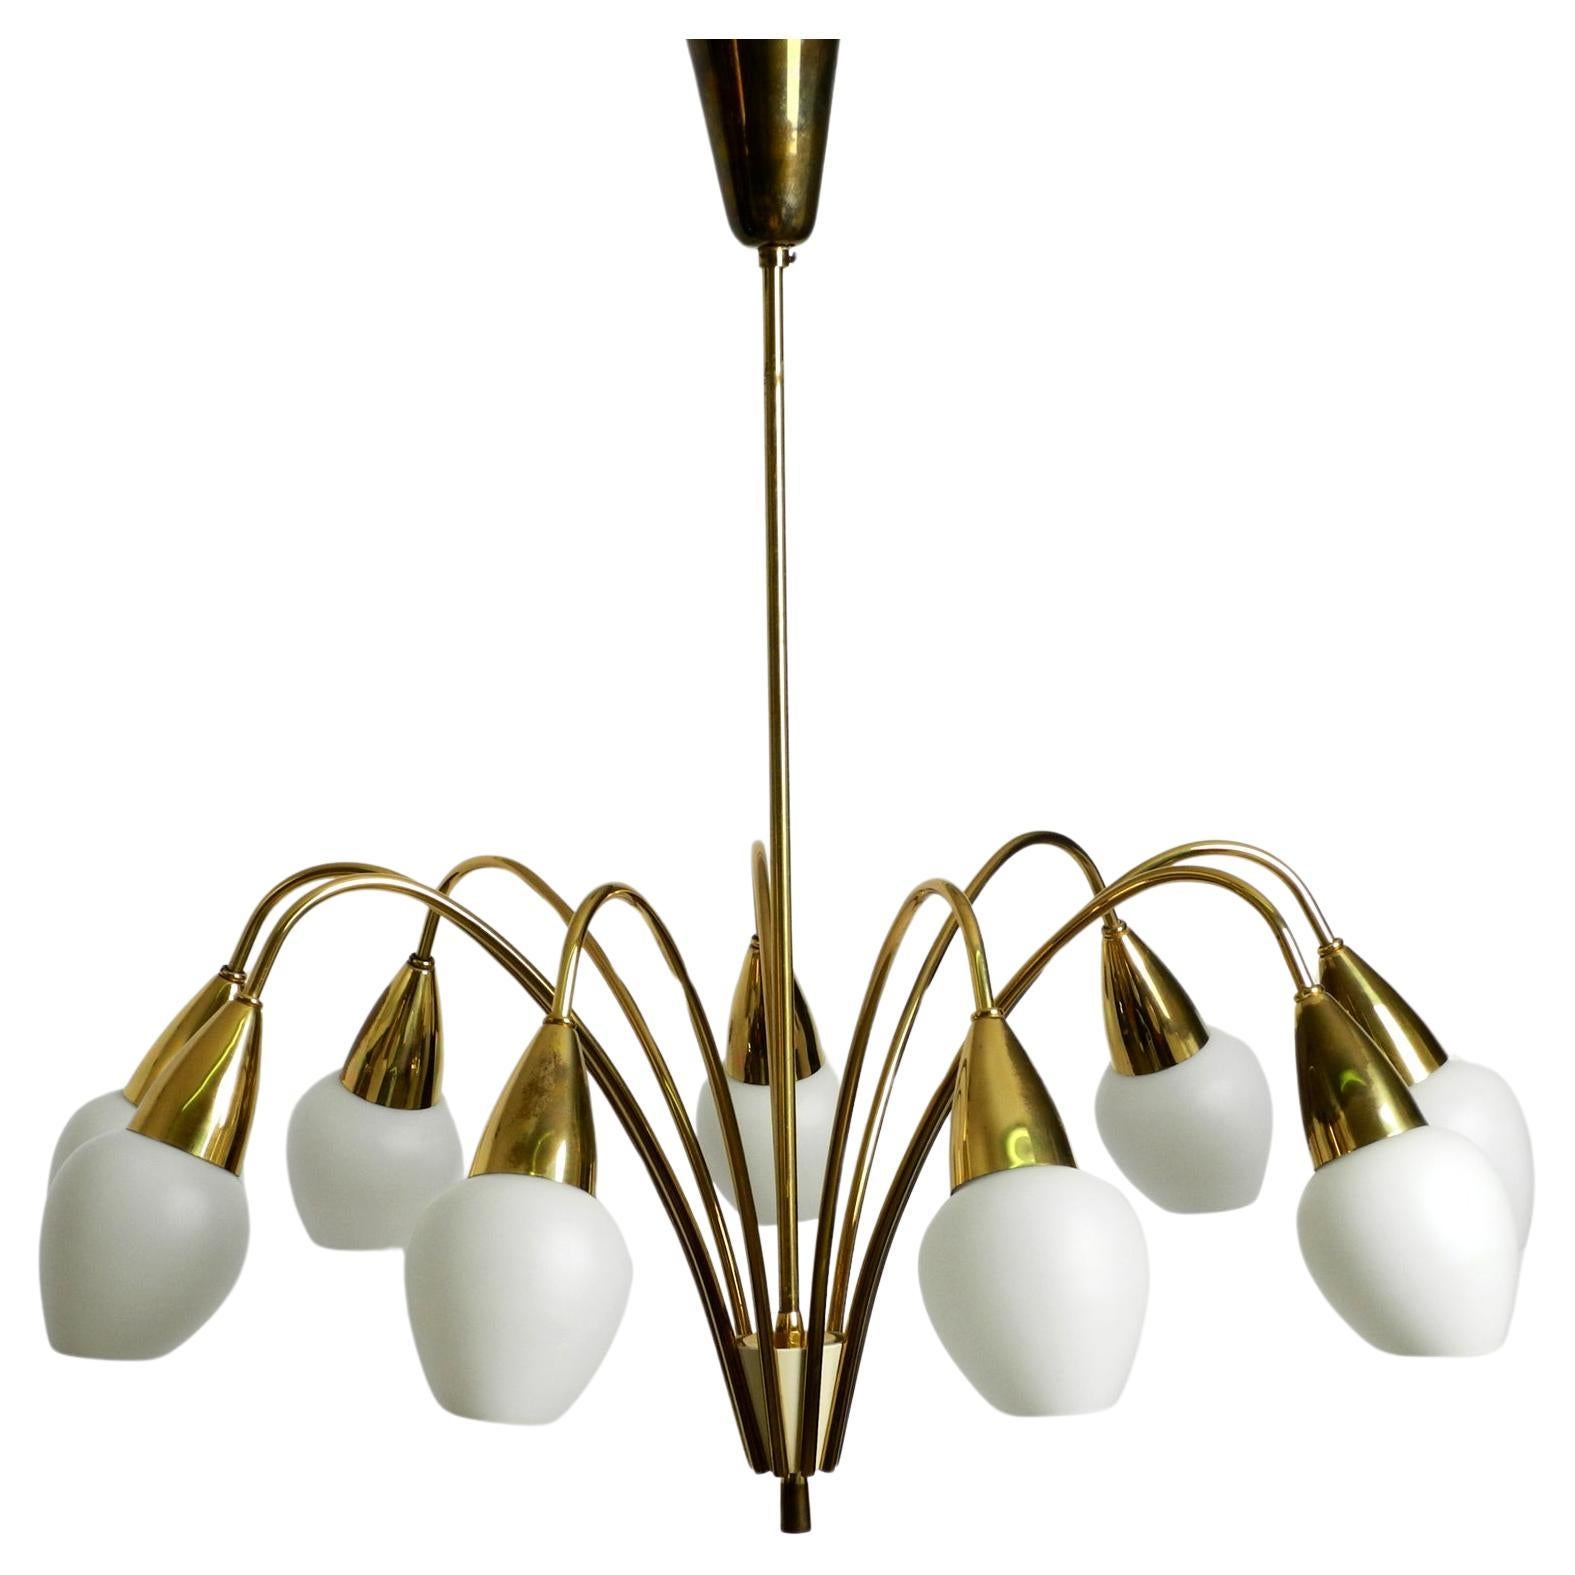 Fantastically 9-armed large mid-century brass chandelier with opal glass shades For Sale